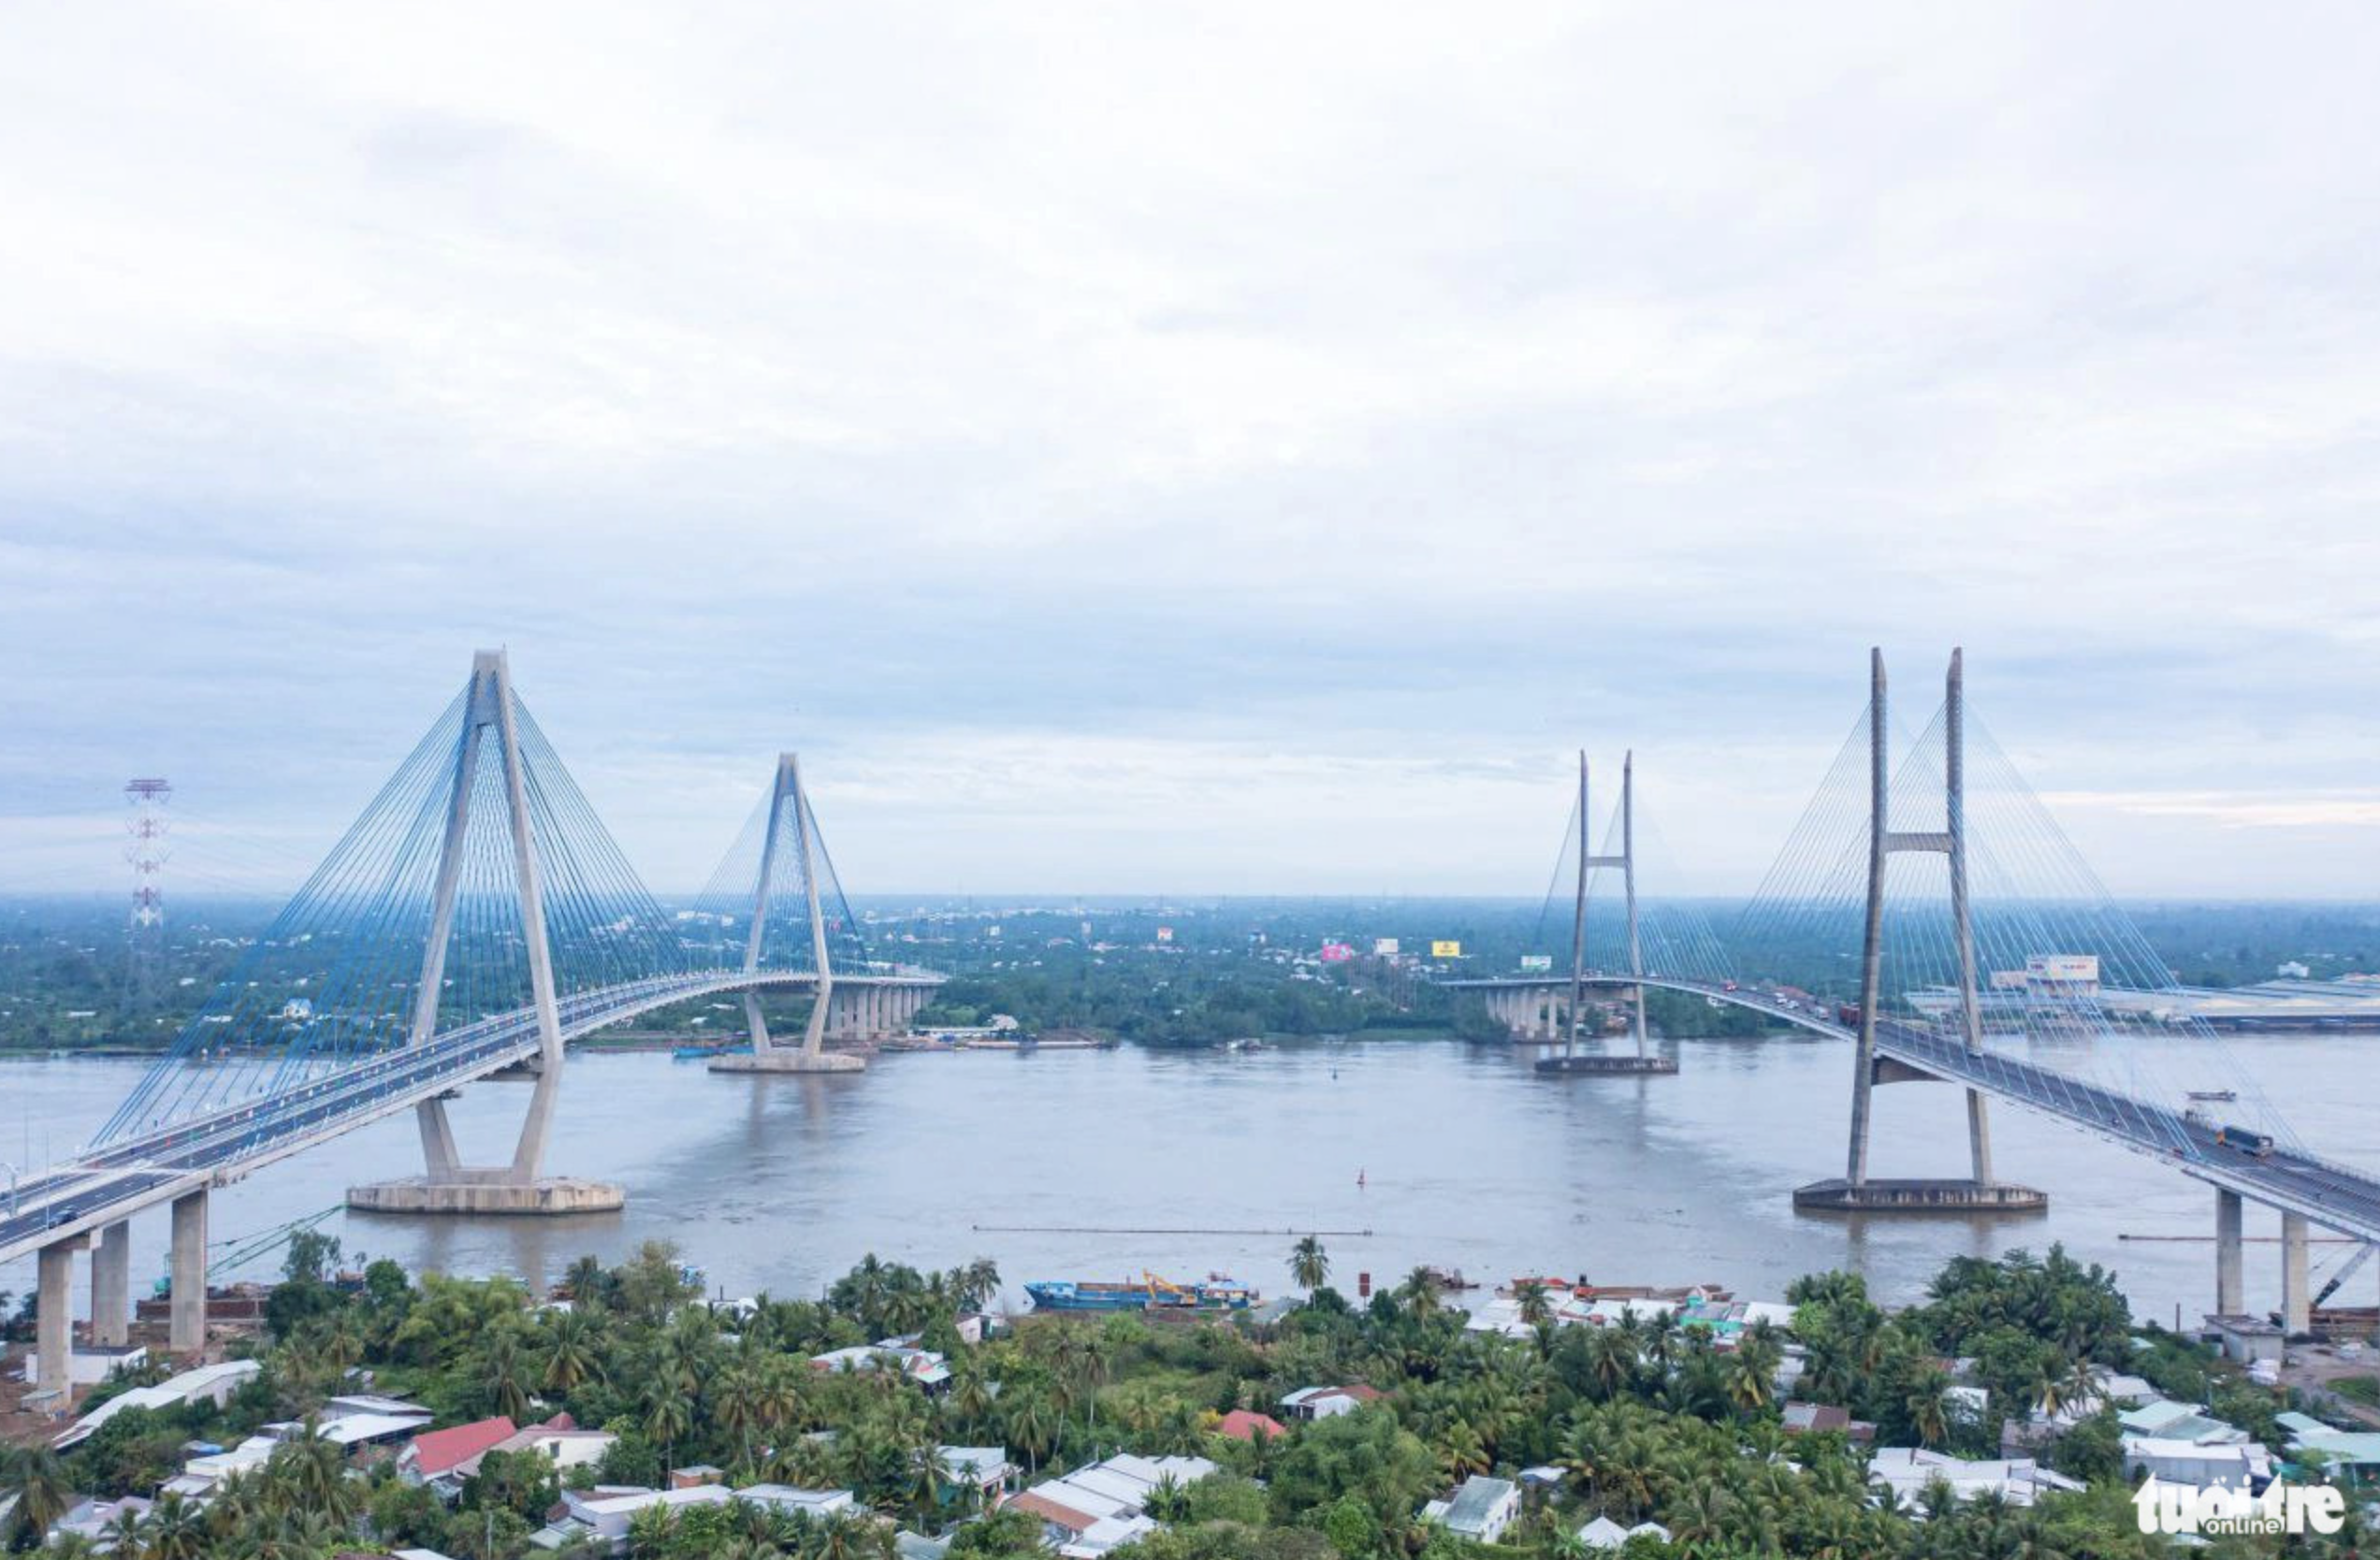 My Thuan 2 Bridge (L), 350 meters from the existing My Thuan 1 Bridge, connects Tien Giang and Vinh Long Provinces in the Mekong Delta region. Photo: Mau Truong / Tuoi Tre